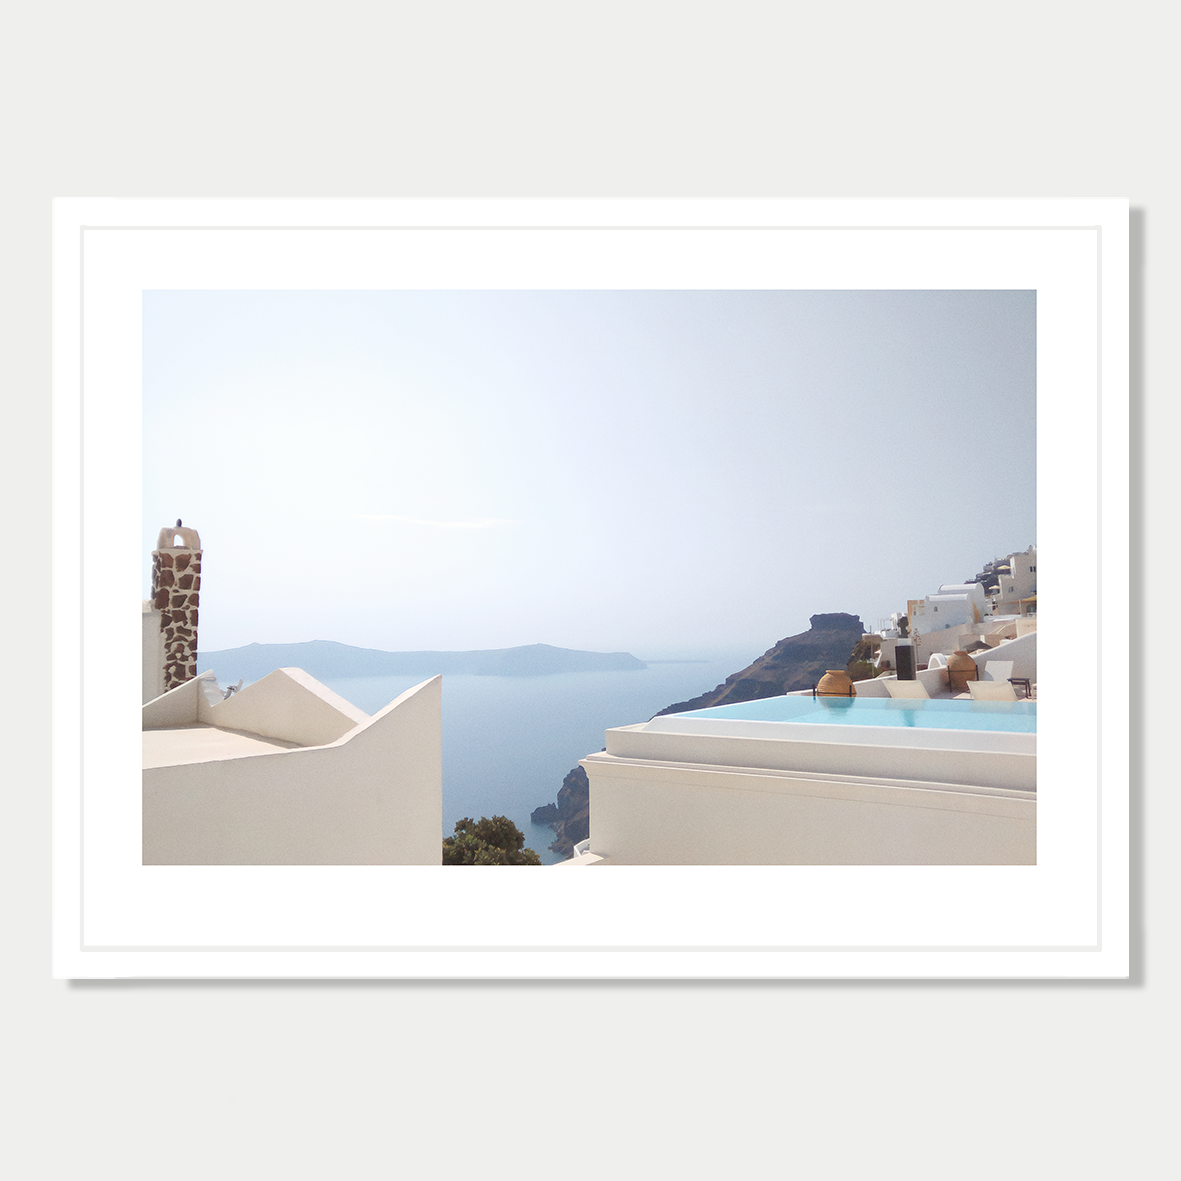 Infinity Pool and Beautiful View - Still Life in Santorini, Greece, Photographic Art Print in a Skinny White Frame